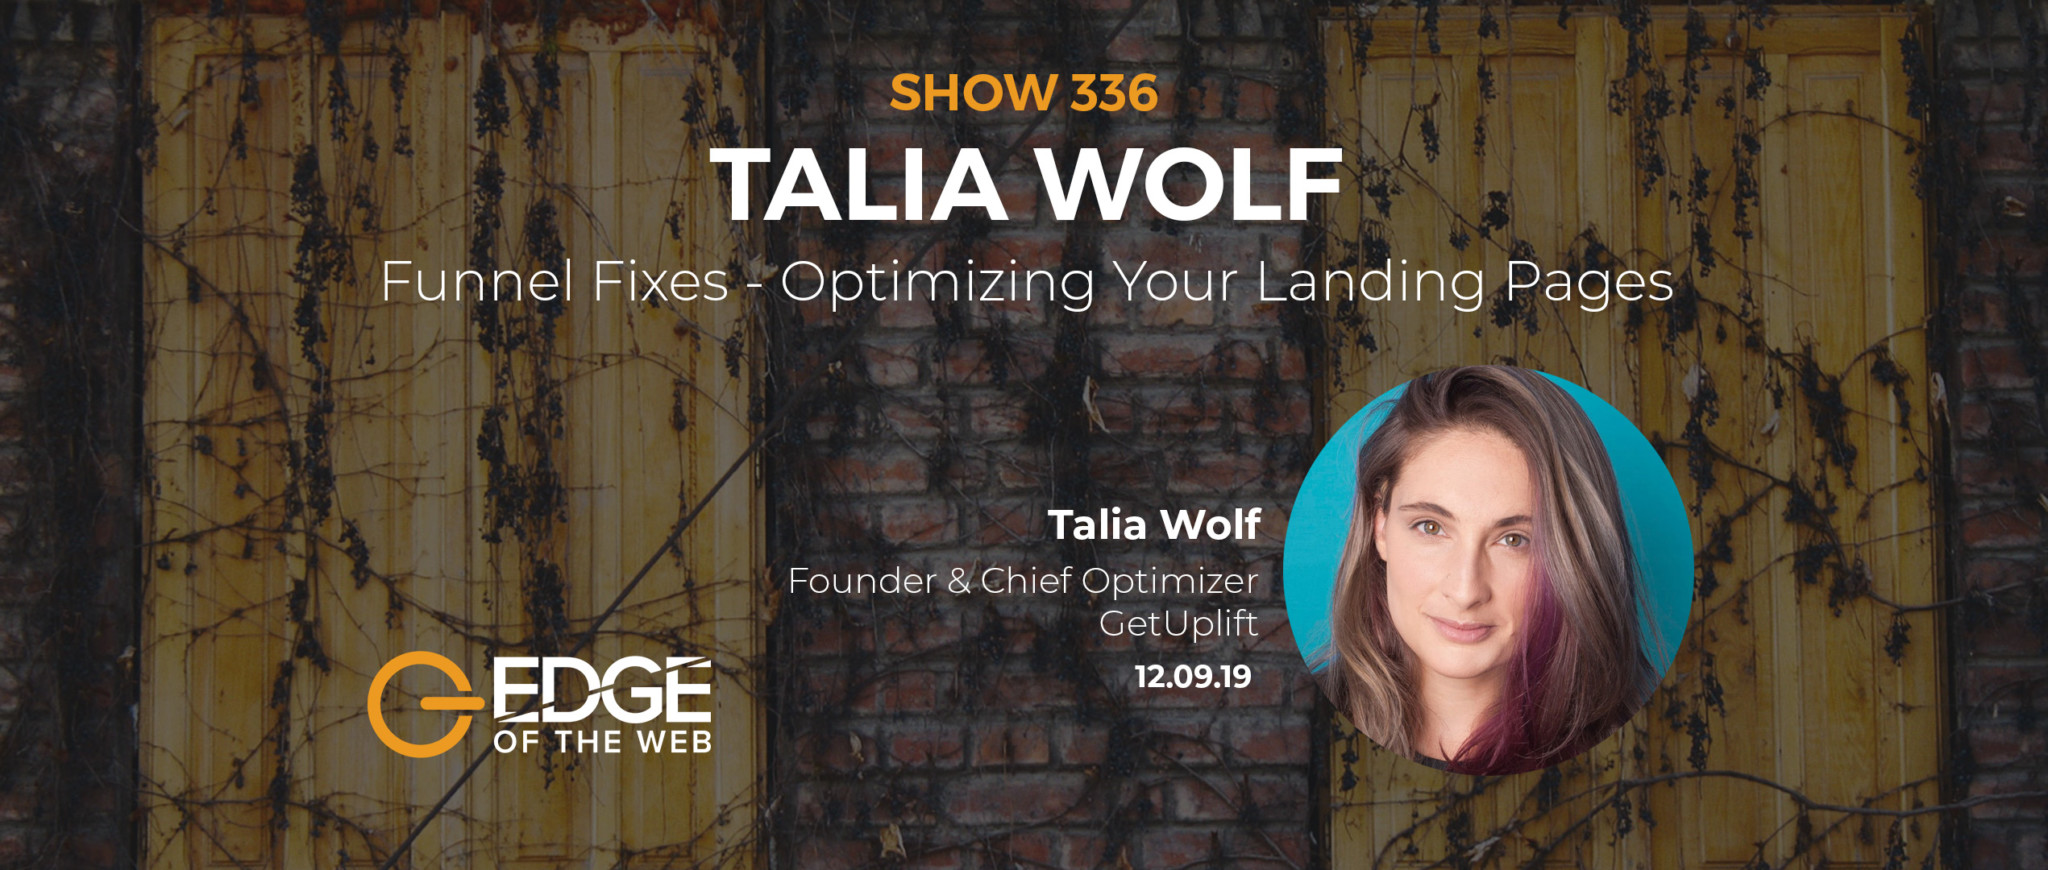 Show 336: Funnel Fixes- Optimizing Your Landing Pages, featuring Talia Wolf